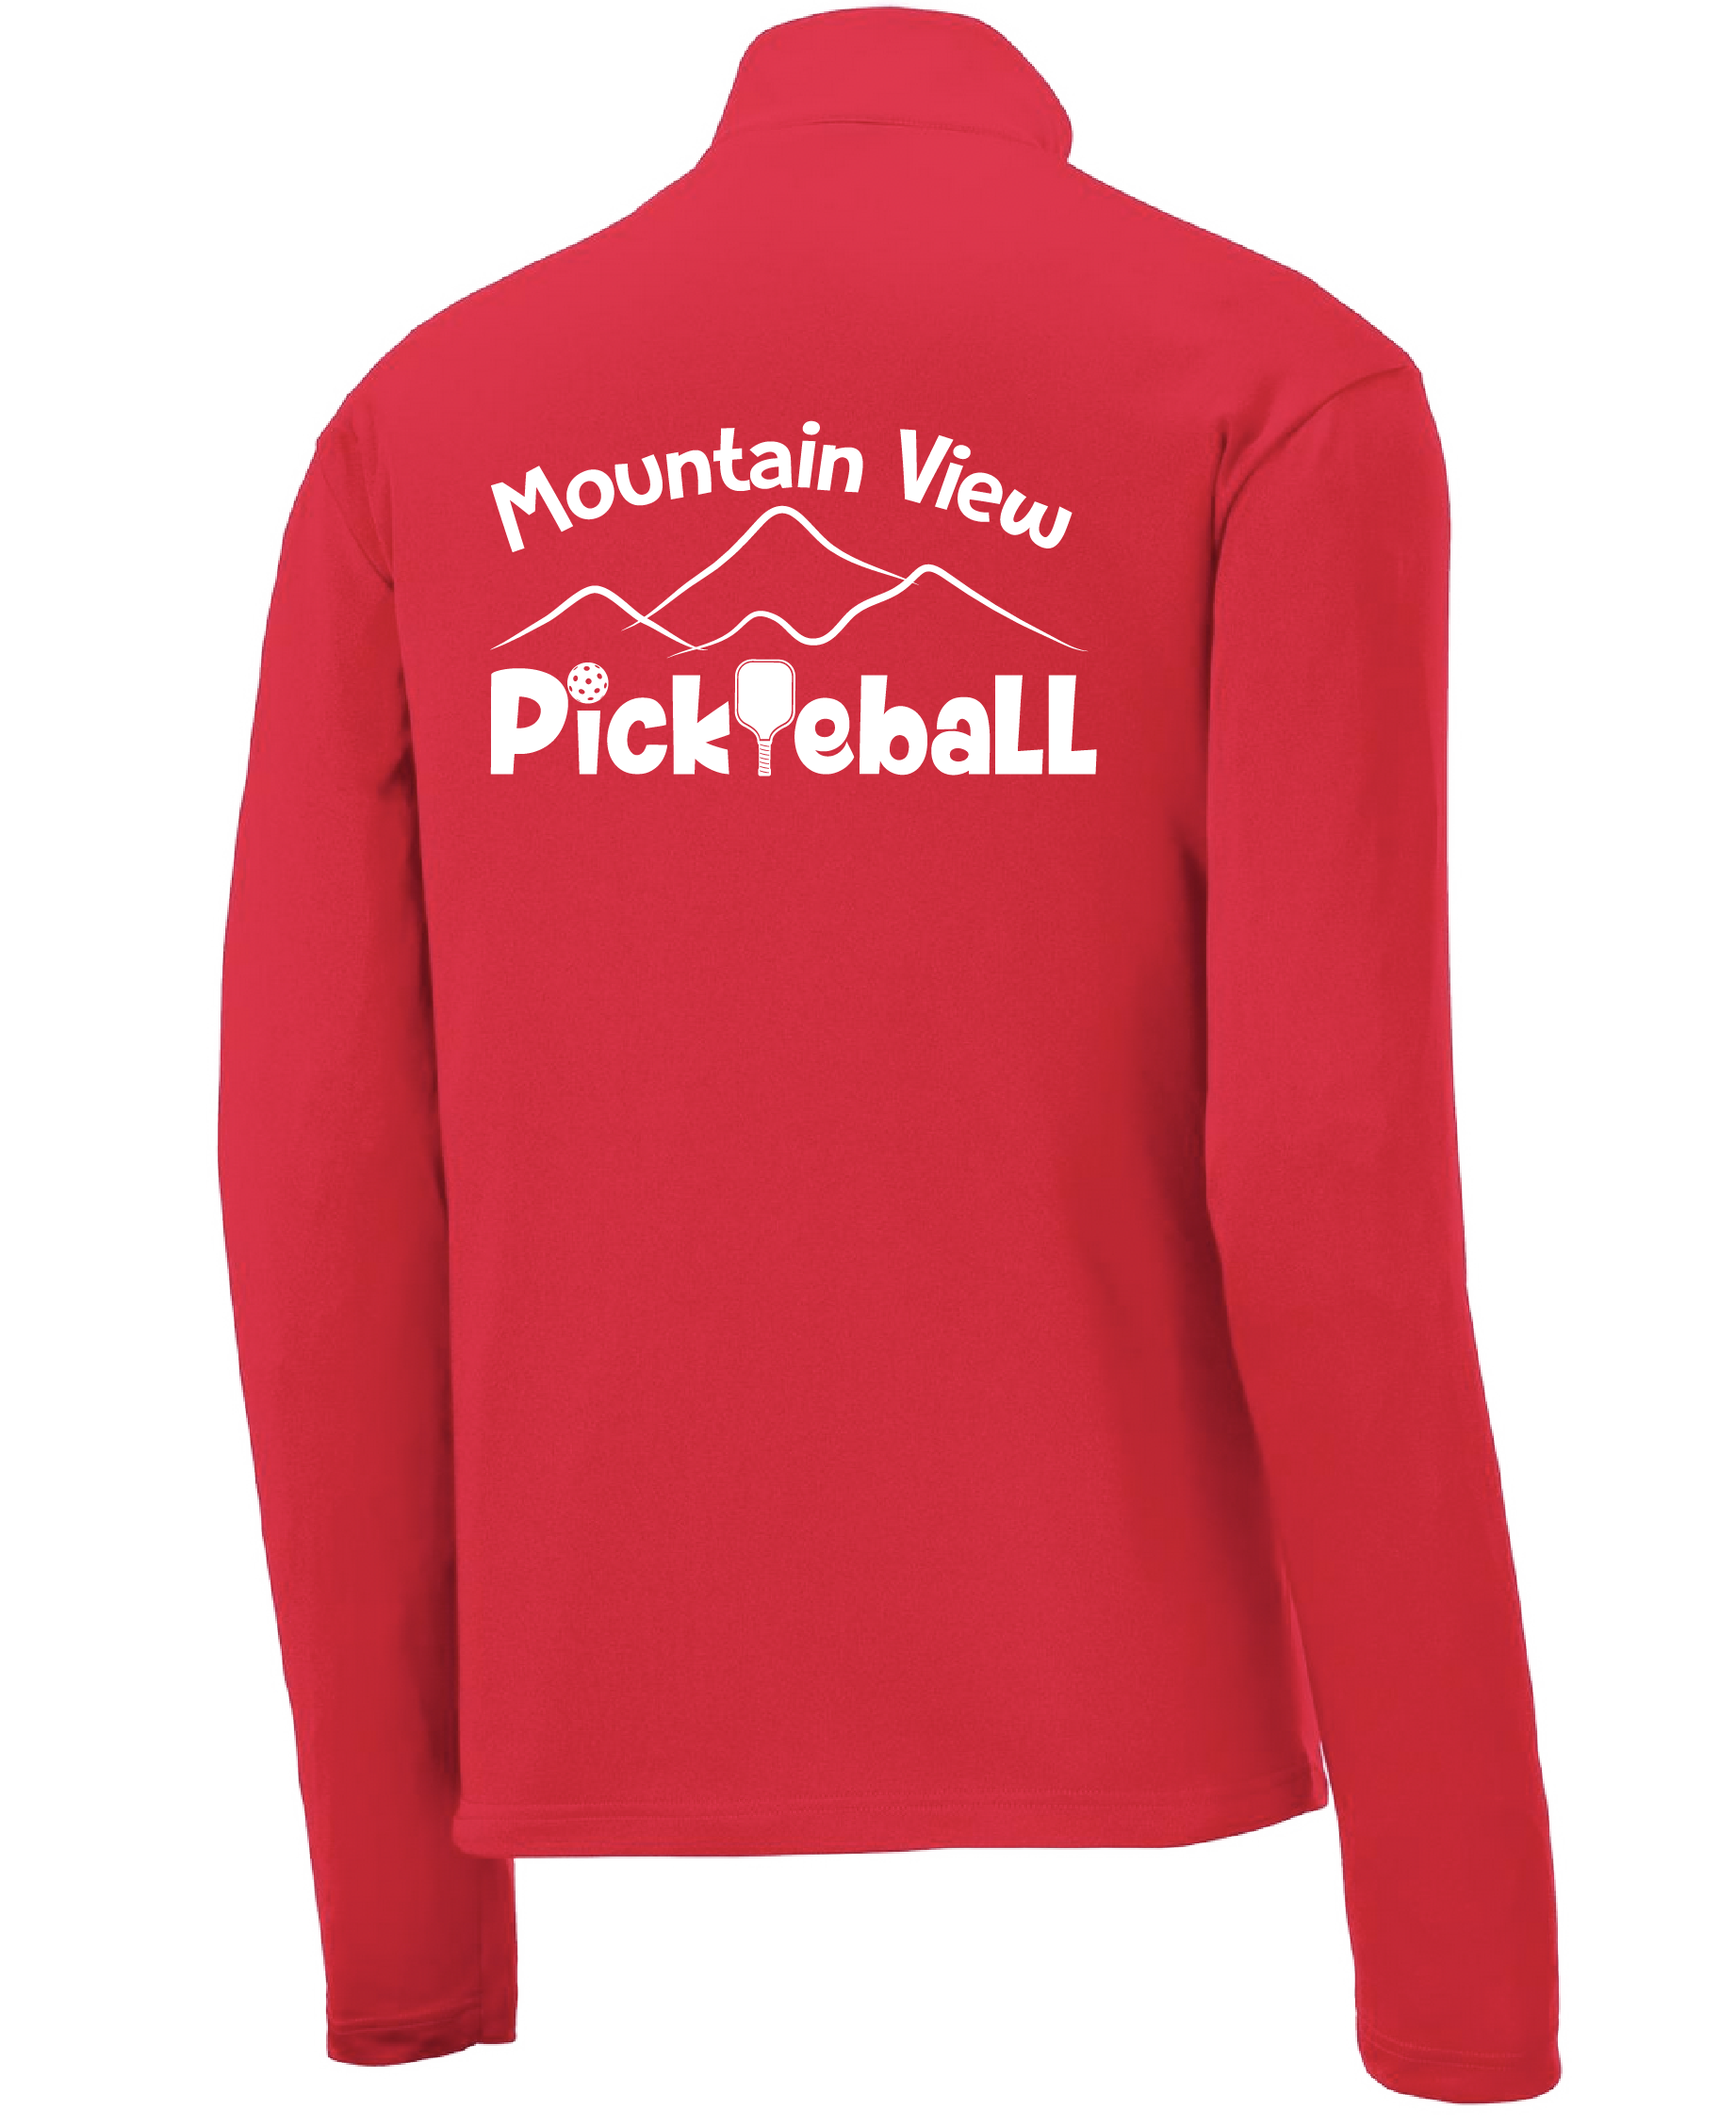 Pickleball Design: Mountain View Pickleball Club  Men's 1/4-Zip Pullover  Turn up the volume in this Men's shirt with its perfect mix of softness and attitude. Material is ultra-comfortable with moisture wicking properties and tri-blend softness. PosiCharge technology locks in color. Highly breathable and lightweight. Versatile enough for wearing year-round.